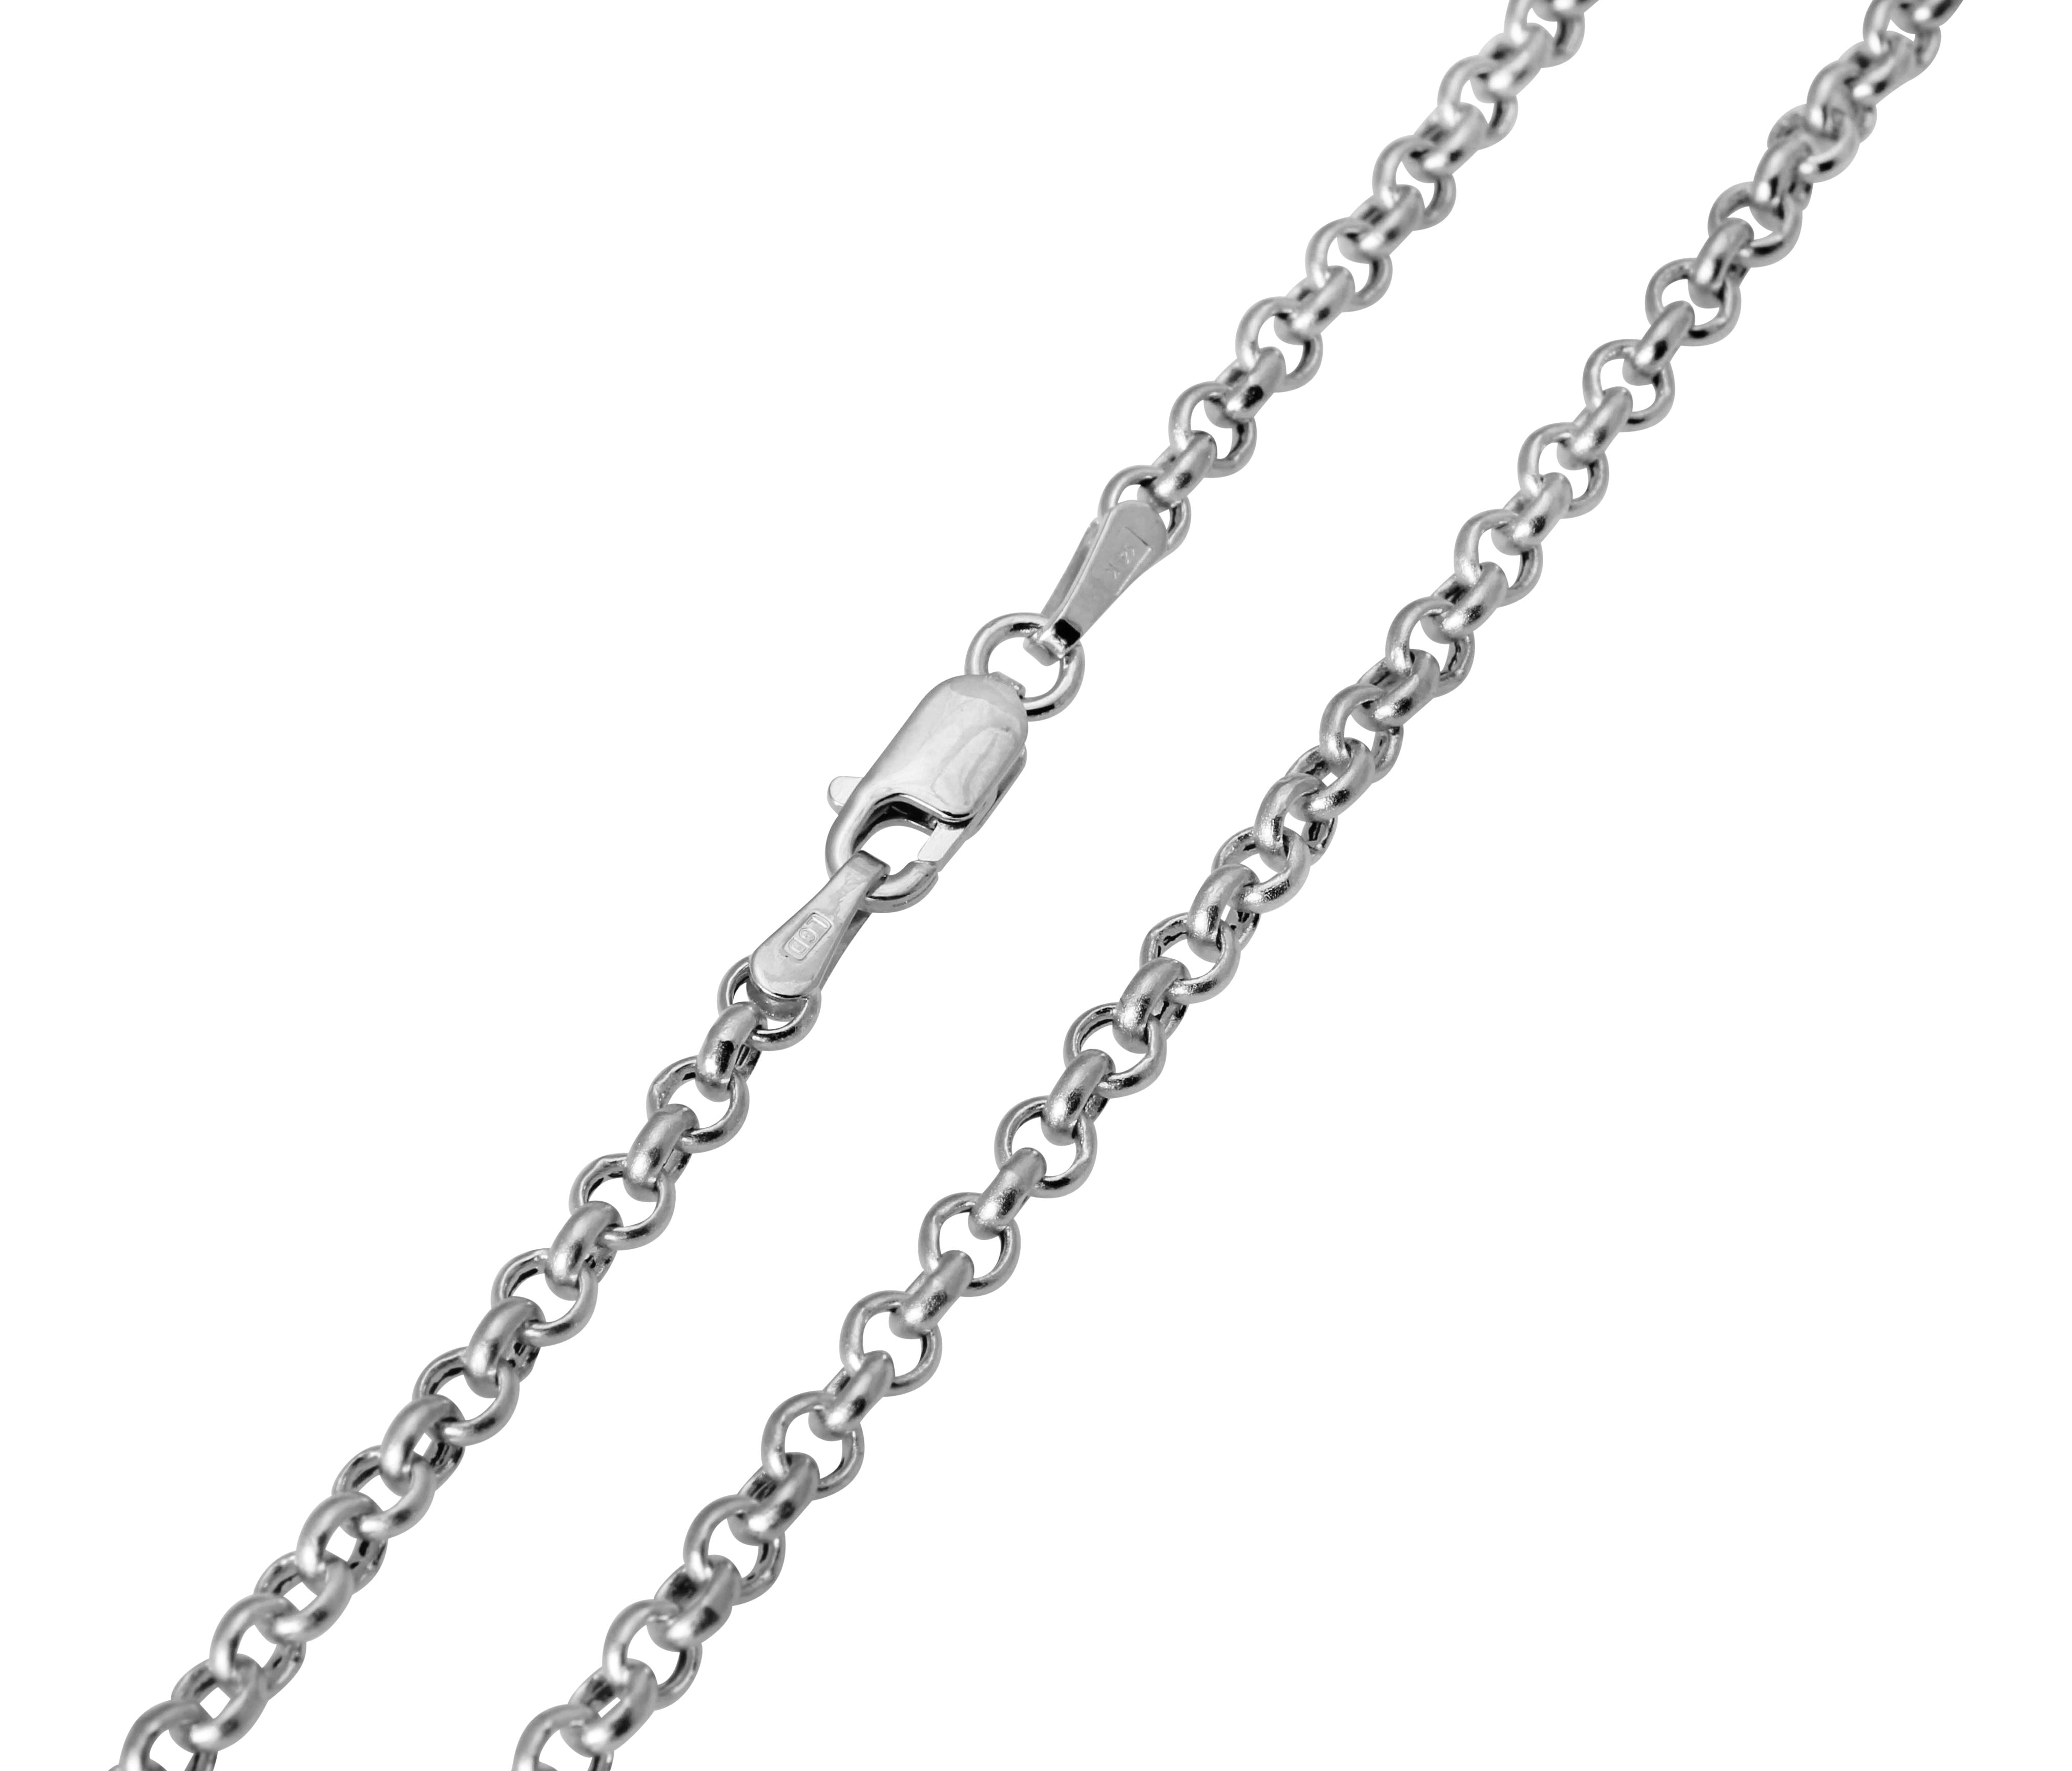 Wellingsale 14k White Gold Polished Solid 1.2mm Classic Rolo Cable Chain Necklace with Spring Ring Clasp